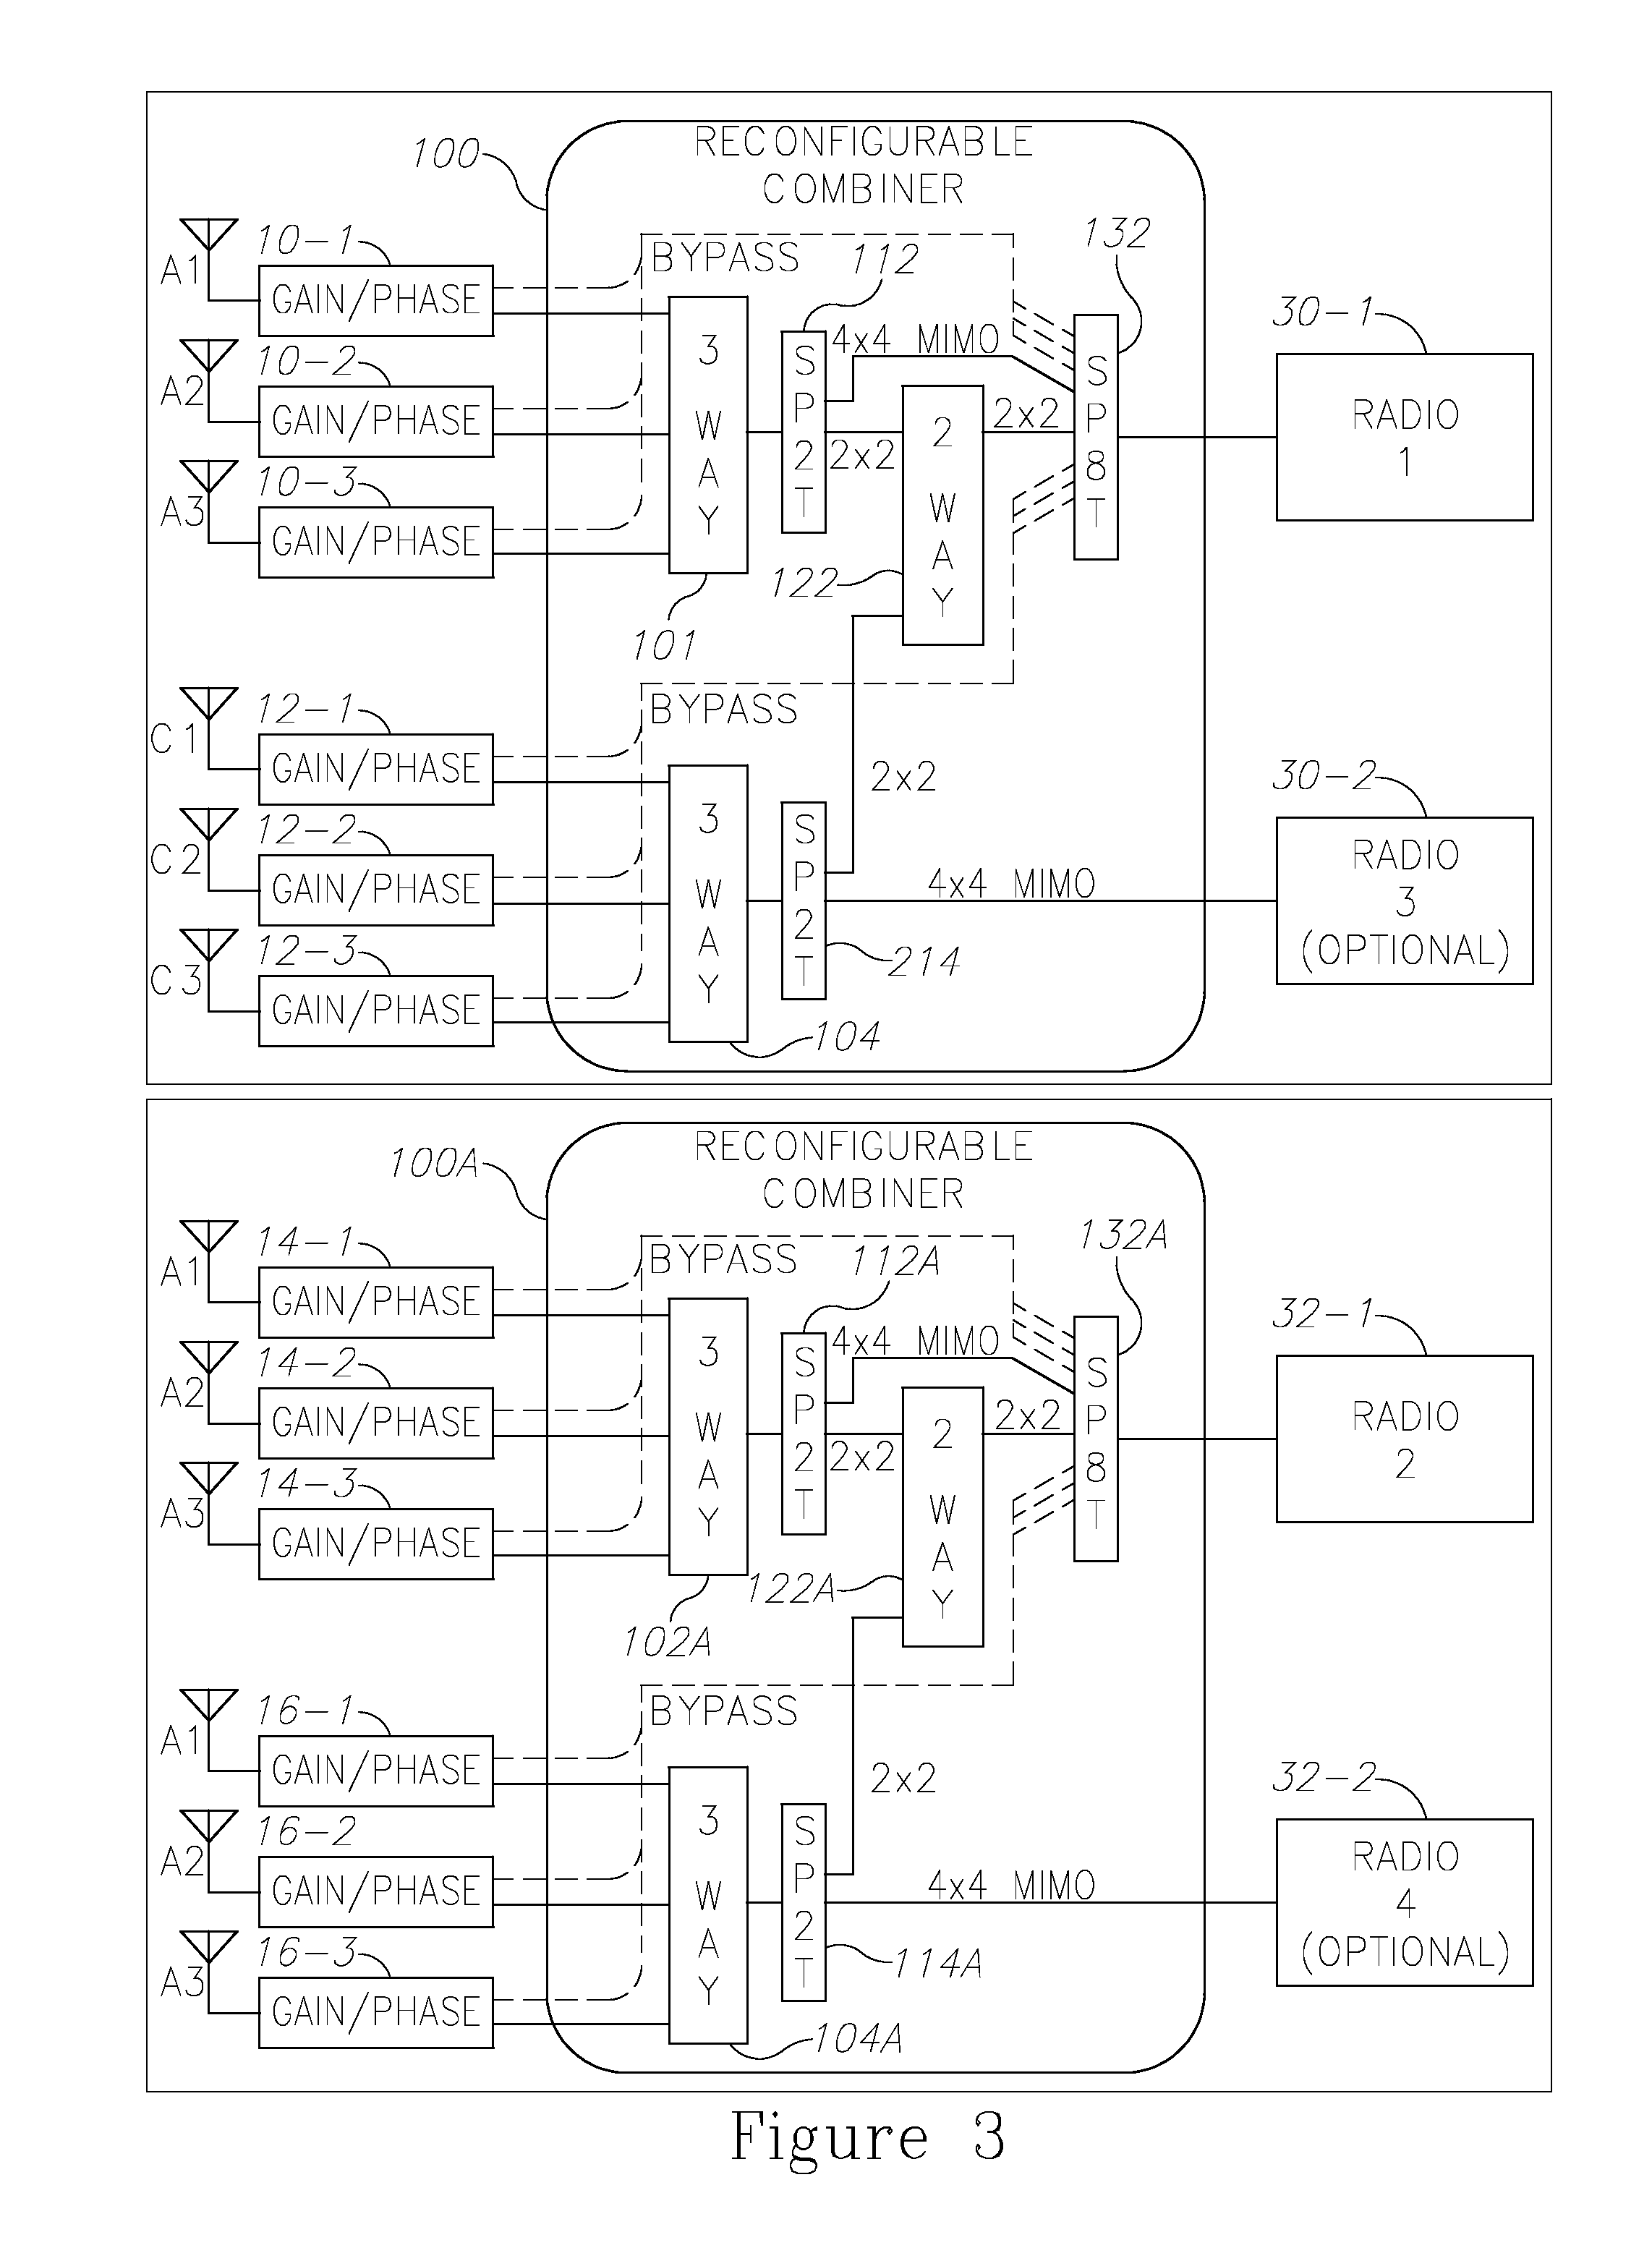 Beamformer configurable for connecting a variable number of antennas and radio circuits